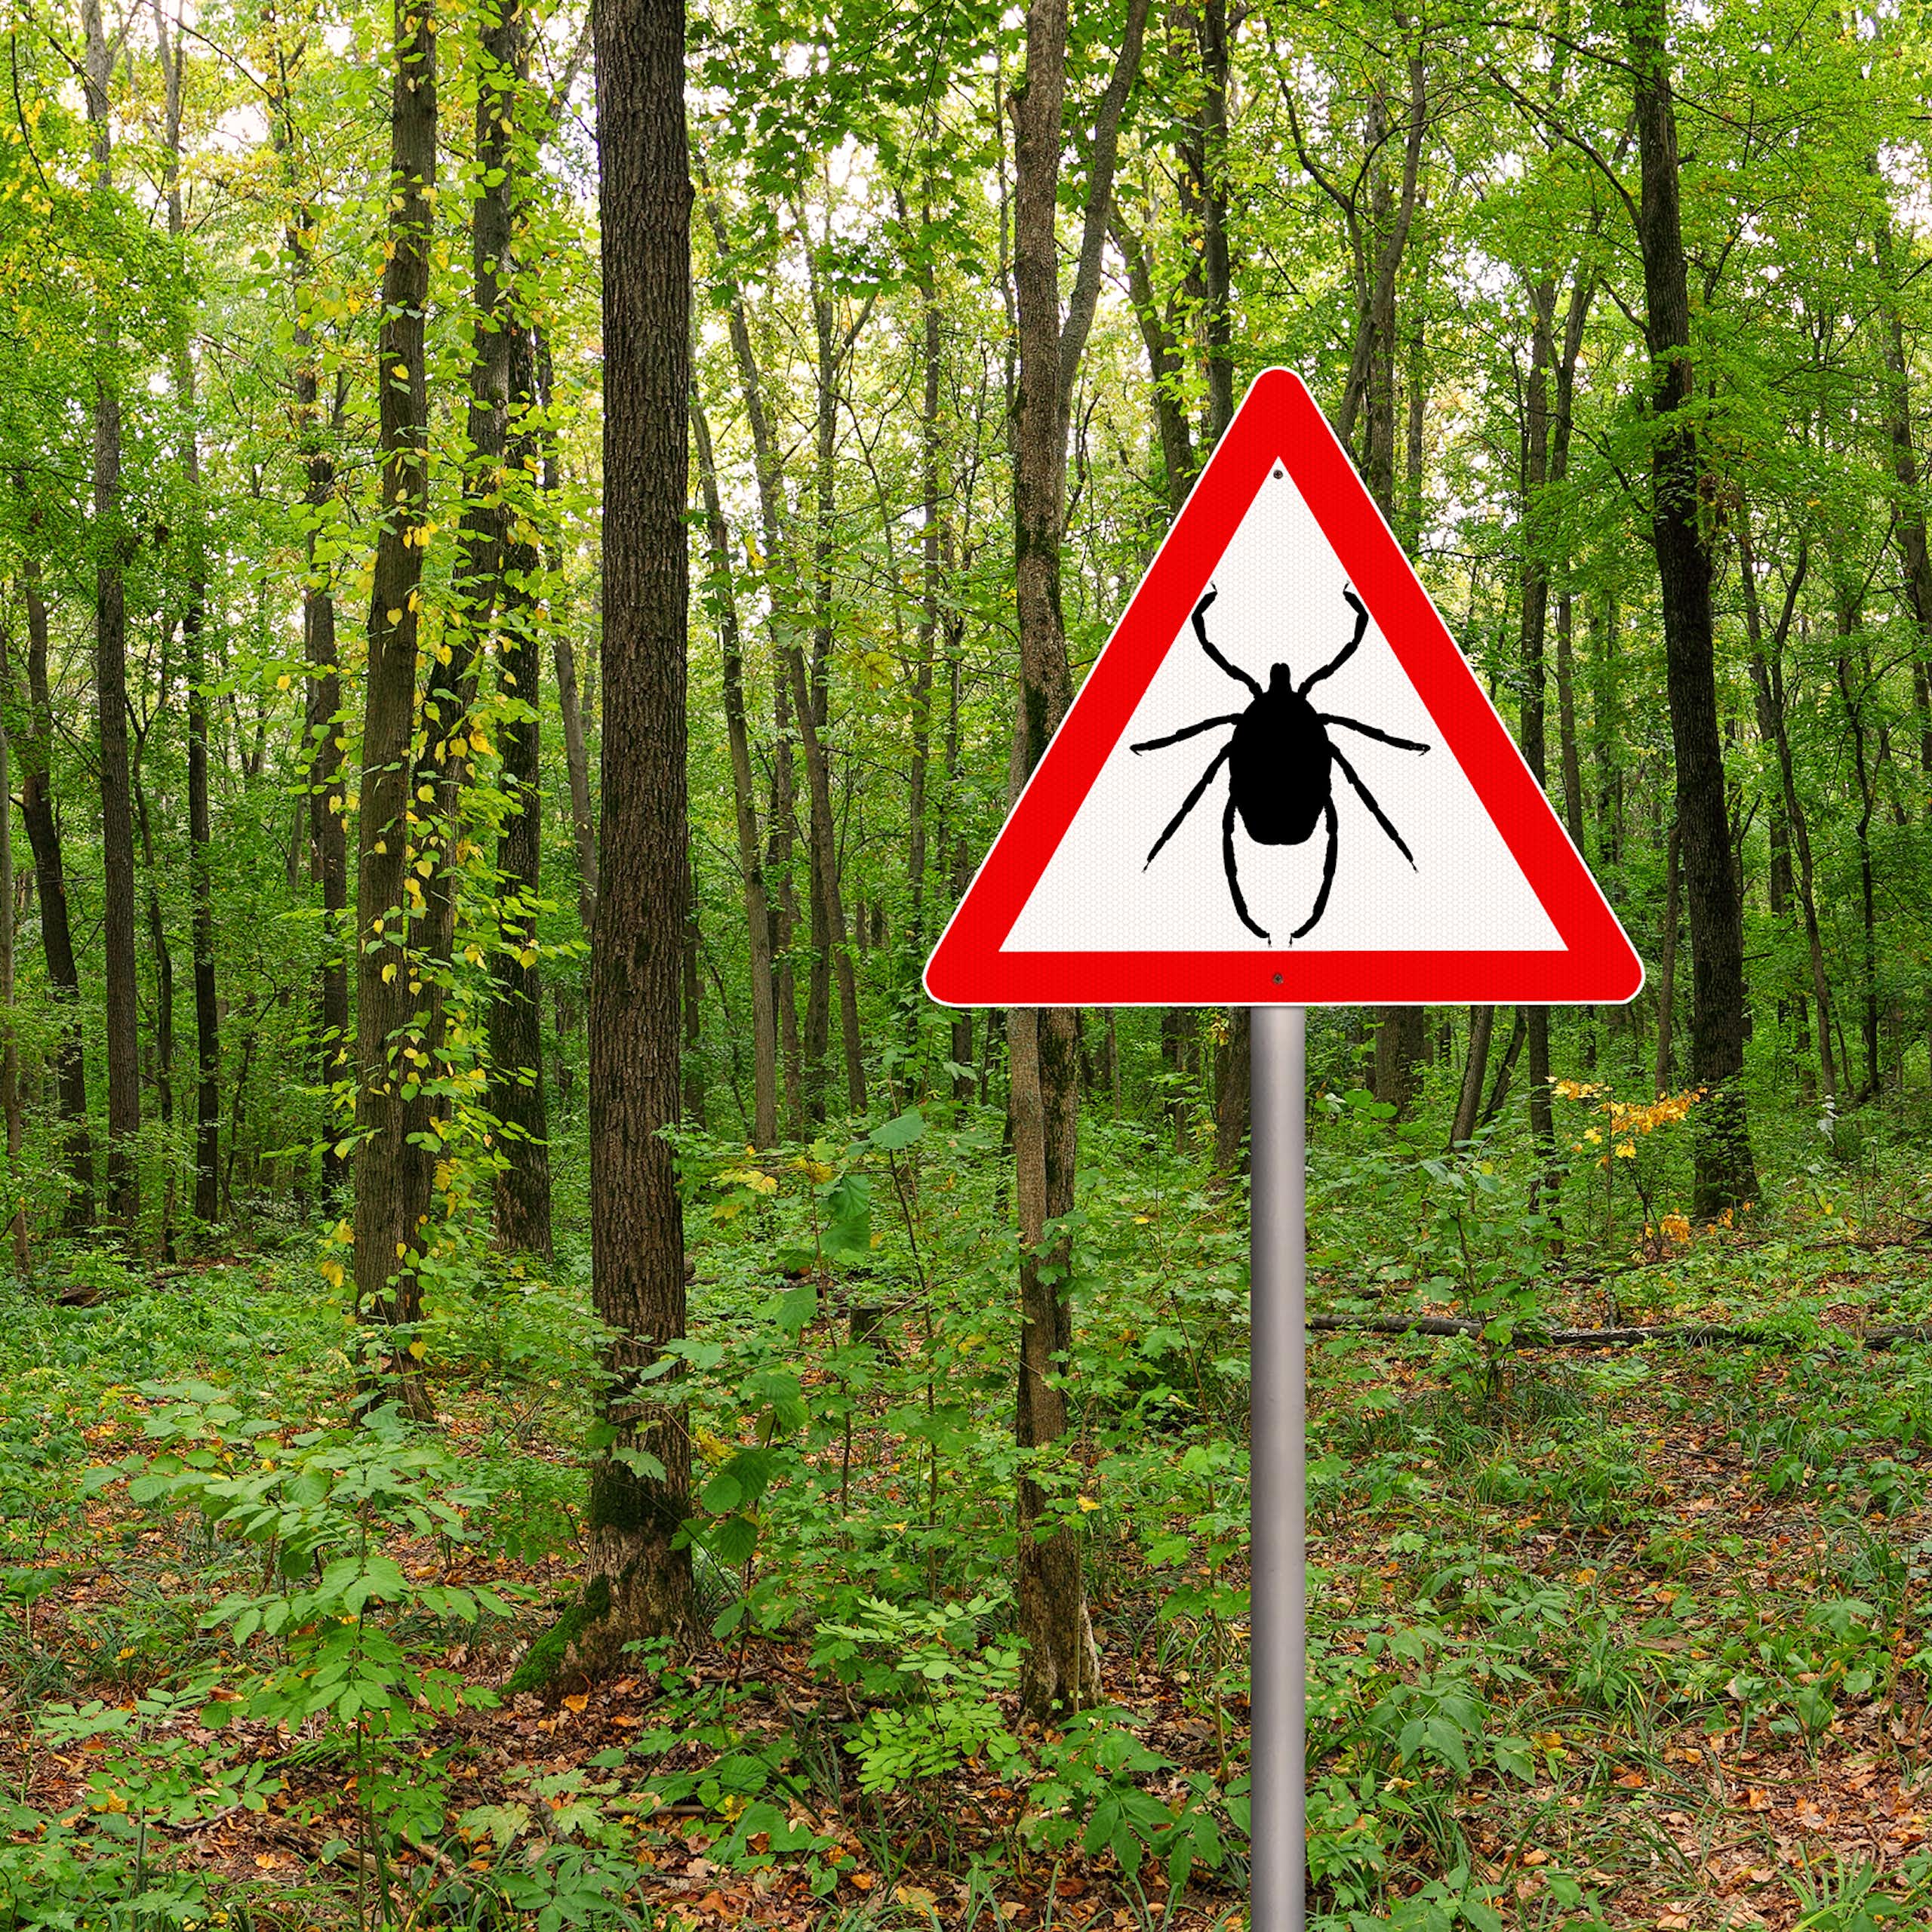 A forest with a sign in the foreground showing a tick in a caution triangle